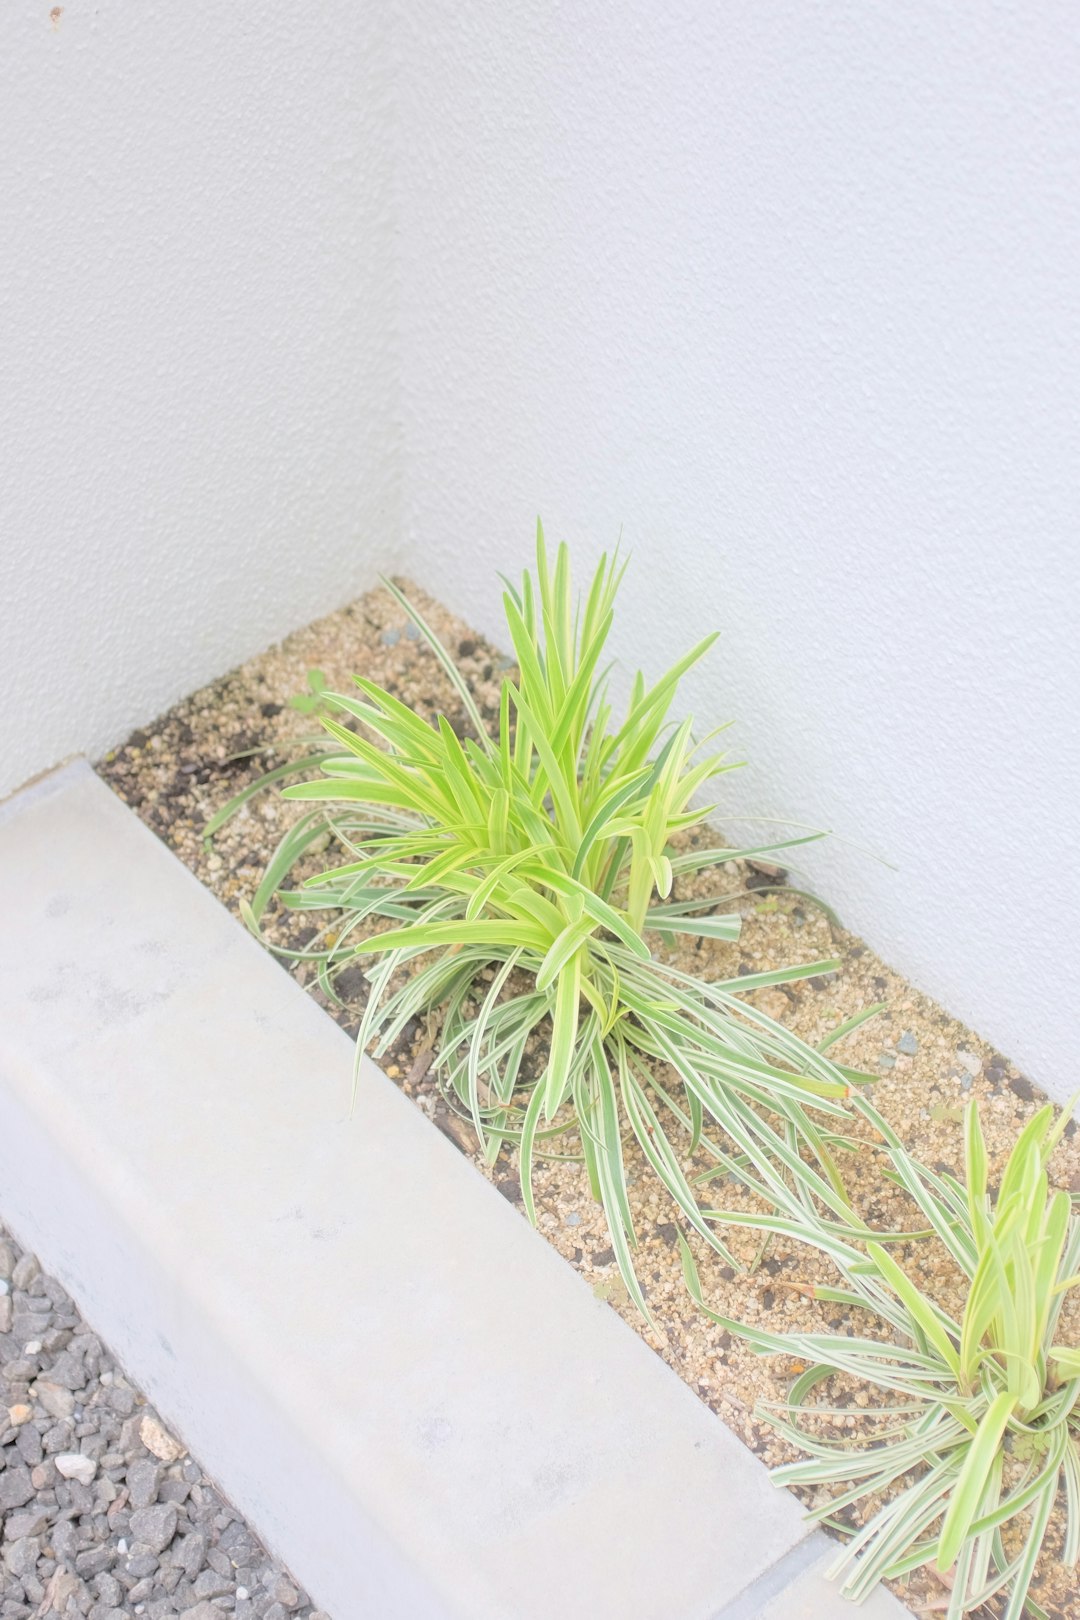 green plant beside white wall